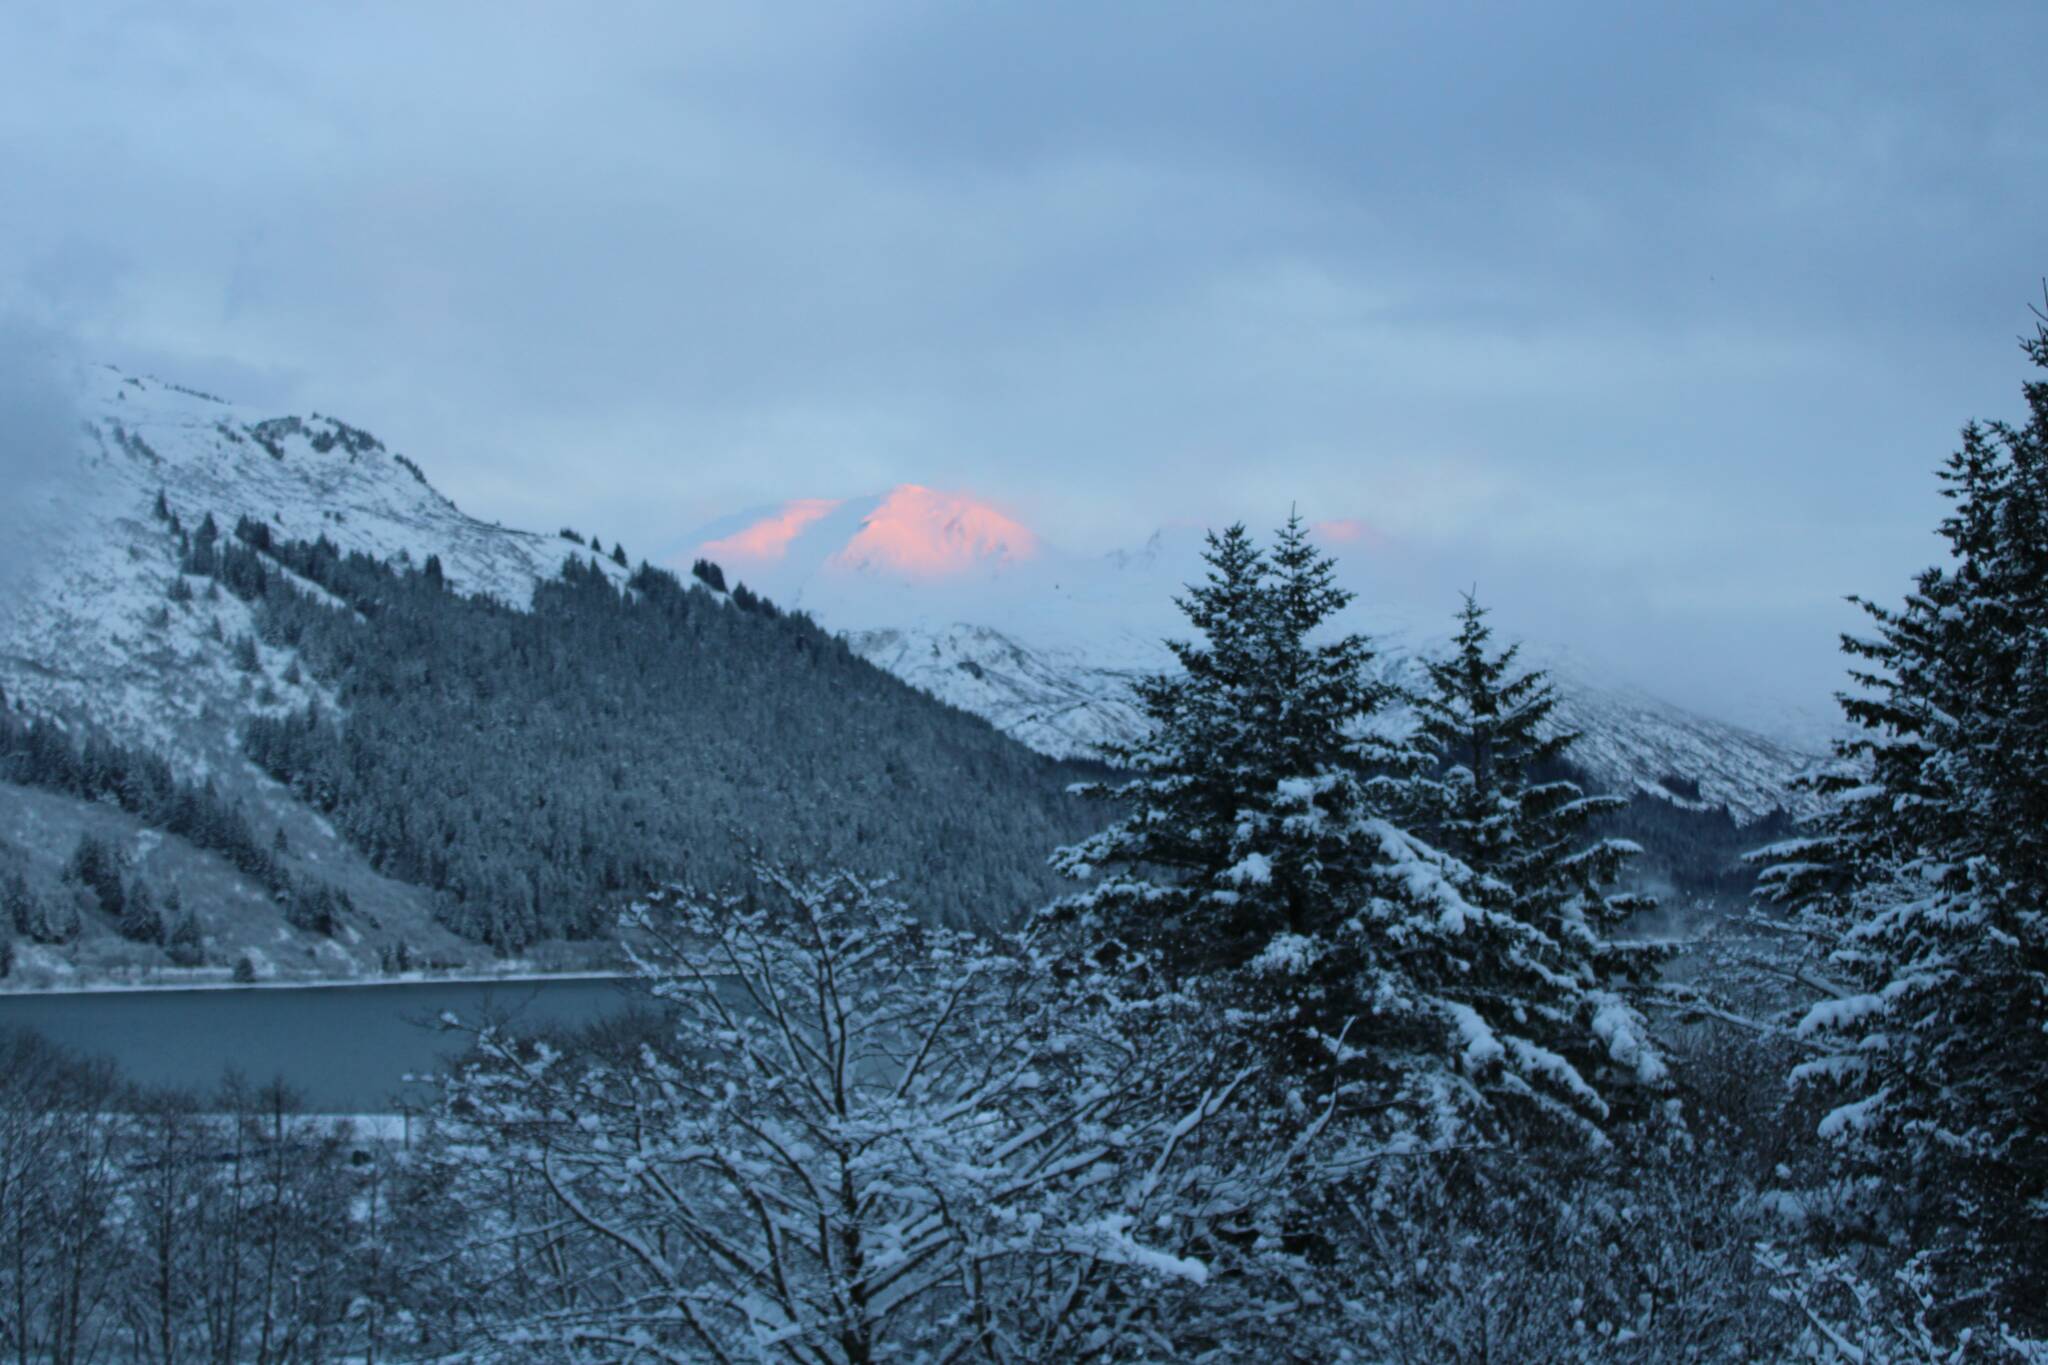 Clearing skies appeared over the Gastineau Channel late in the afternoon on Tuesday, Dec. 21, after a quick-moving snowstorm dumped up to 11 inches of snow across the City and Borough of Juneau. (Dana Zigmund/Juneau Empire)